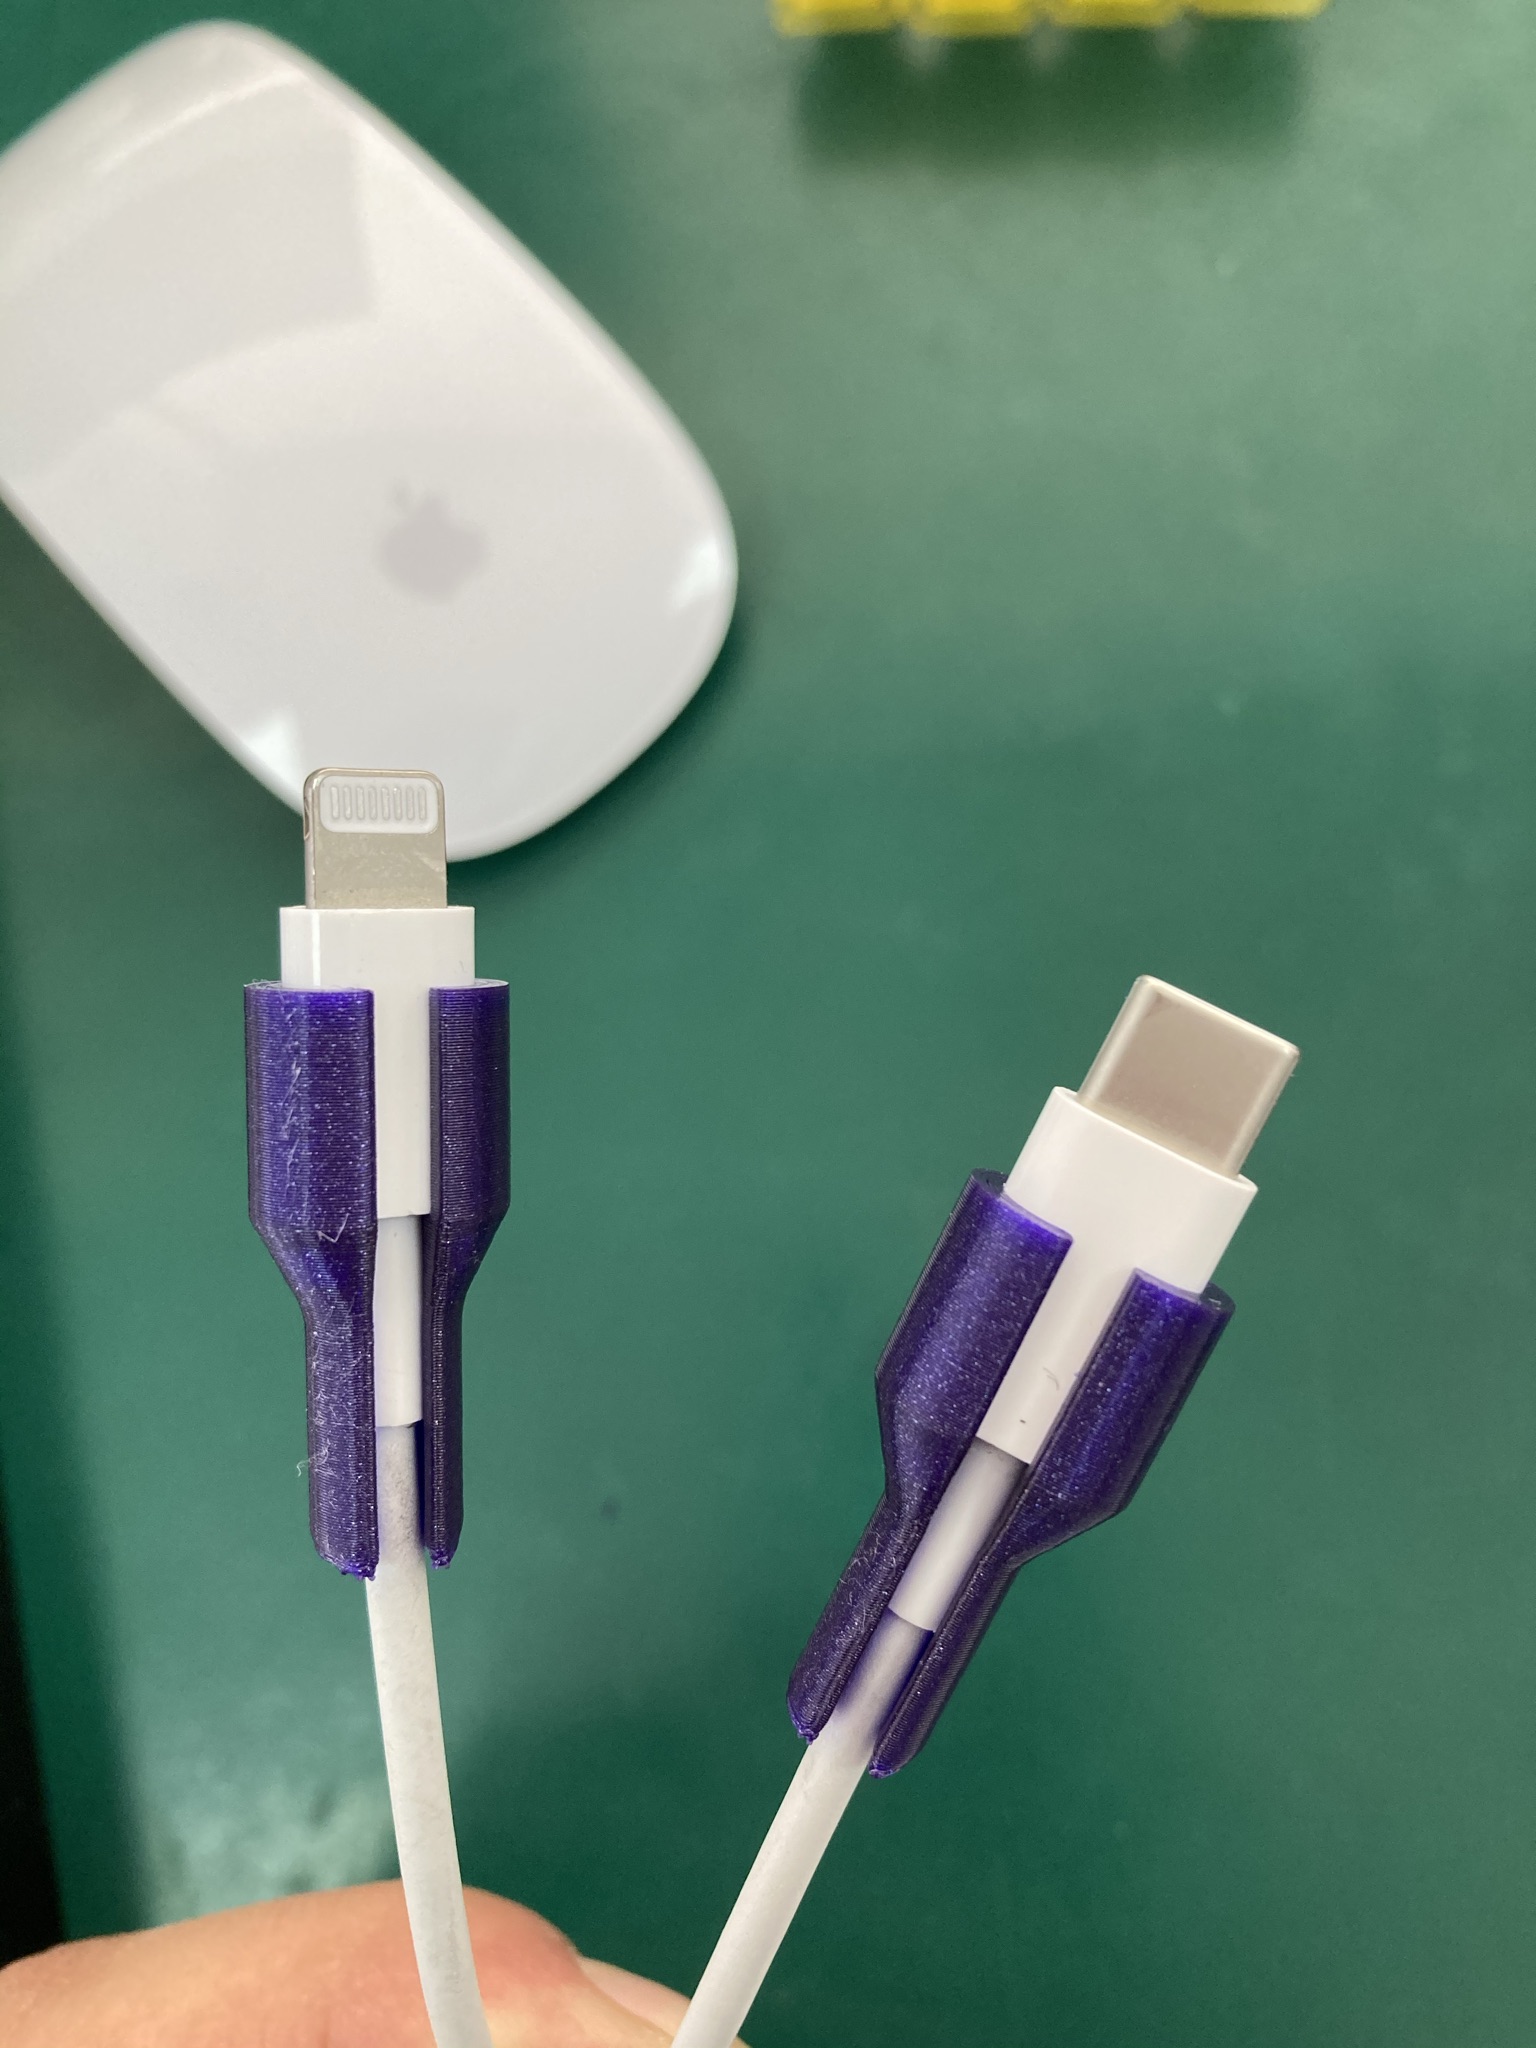 Apple Lightning to USB C cable protector